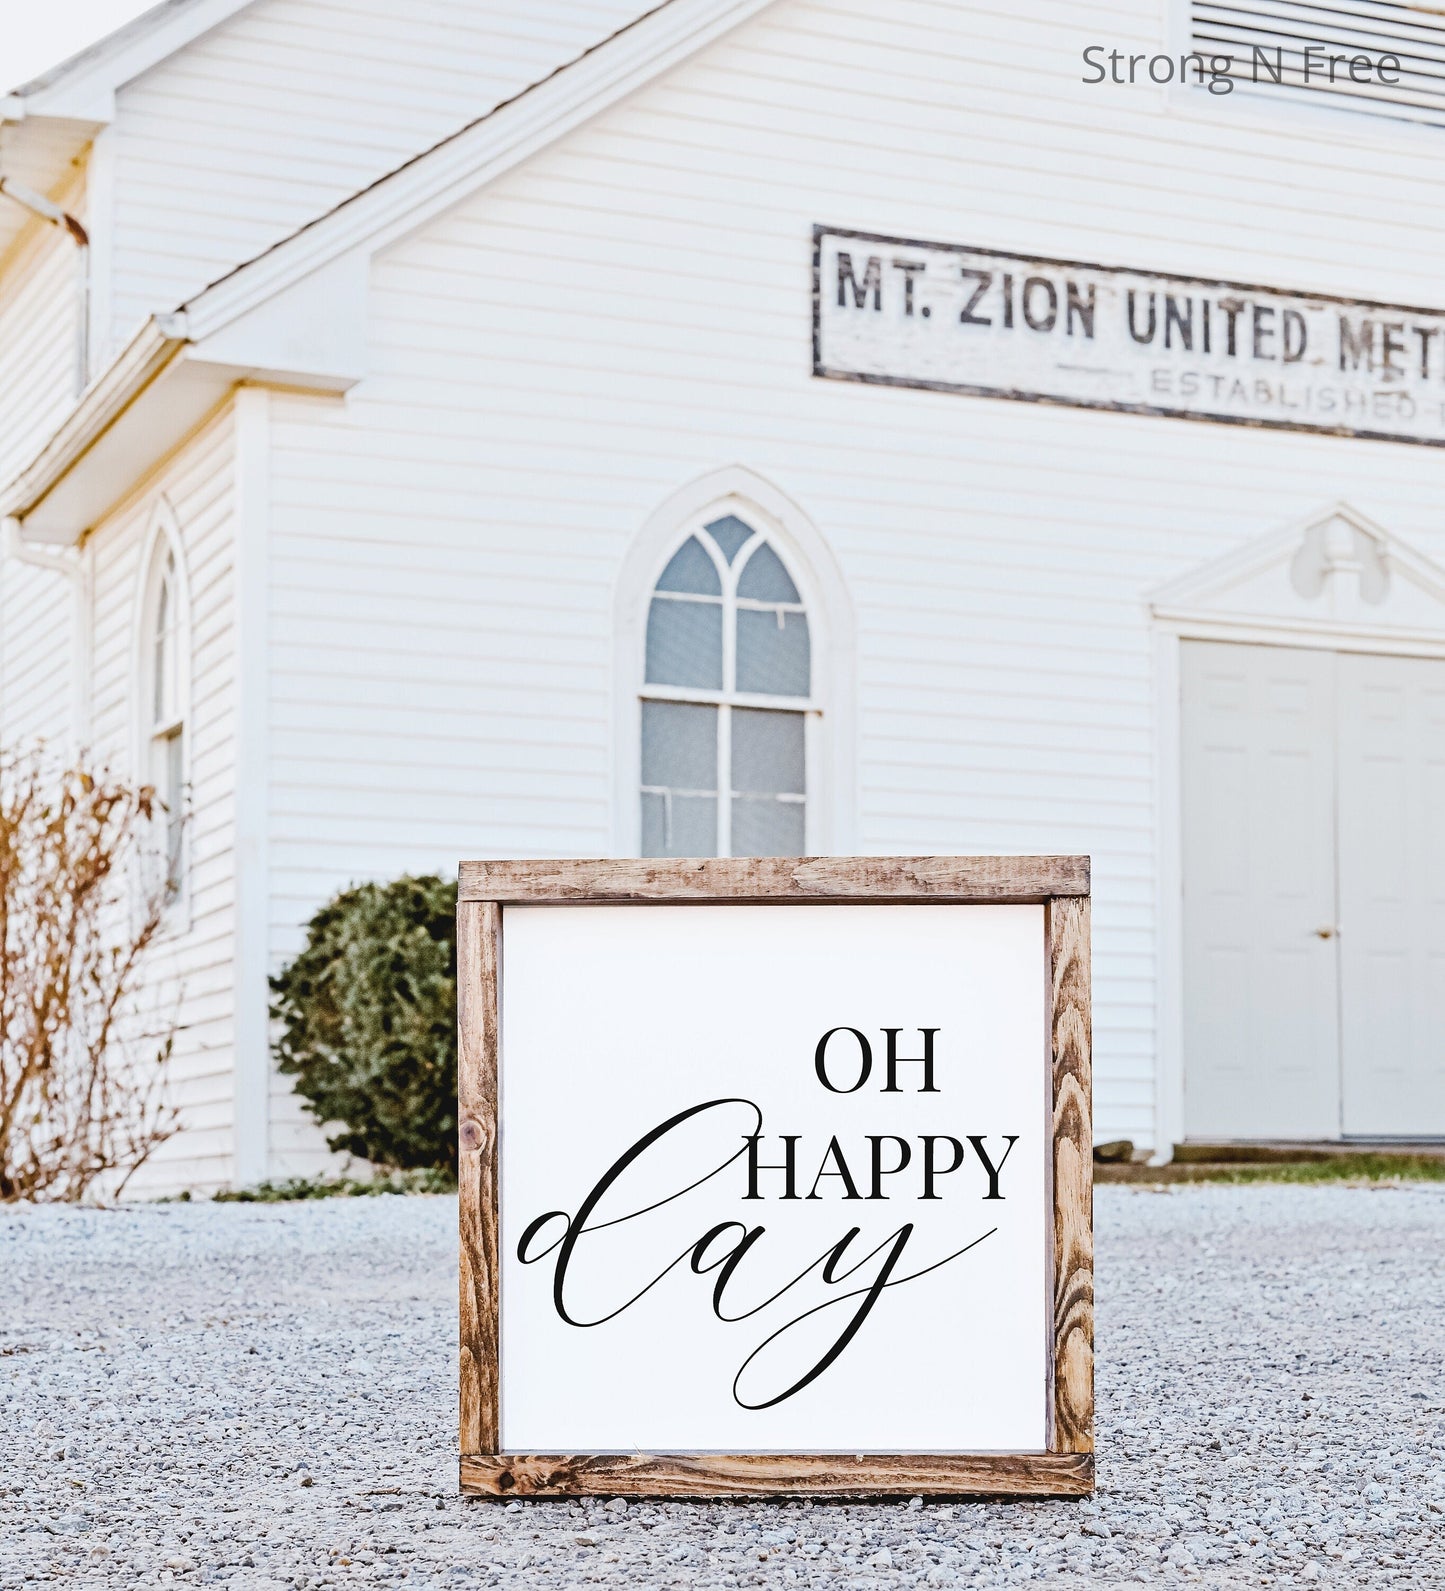 Oh Happy Day | Christmas Gift | Farmhouse Sign | wedding gift, rustic wooden sign, farmhouse decor